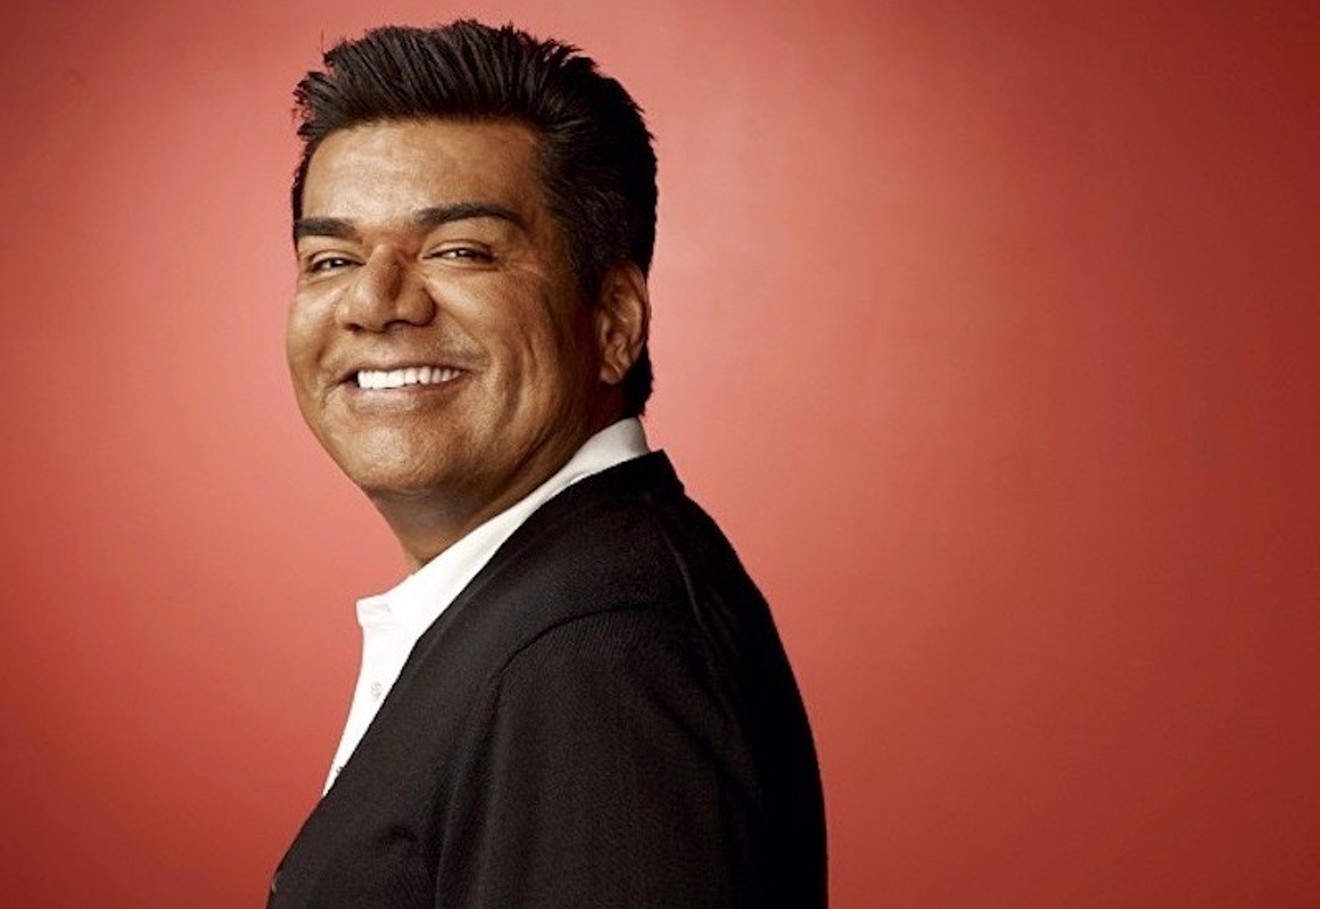 A new survey determined that George Lopez is the Centennial State's favorite comic.